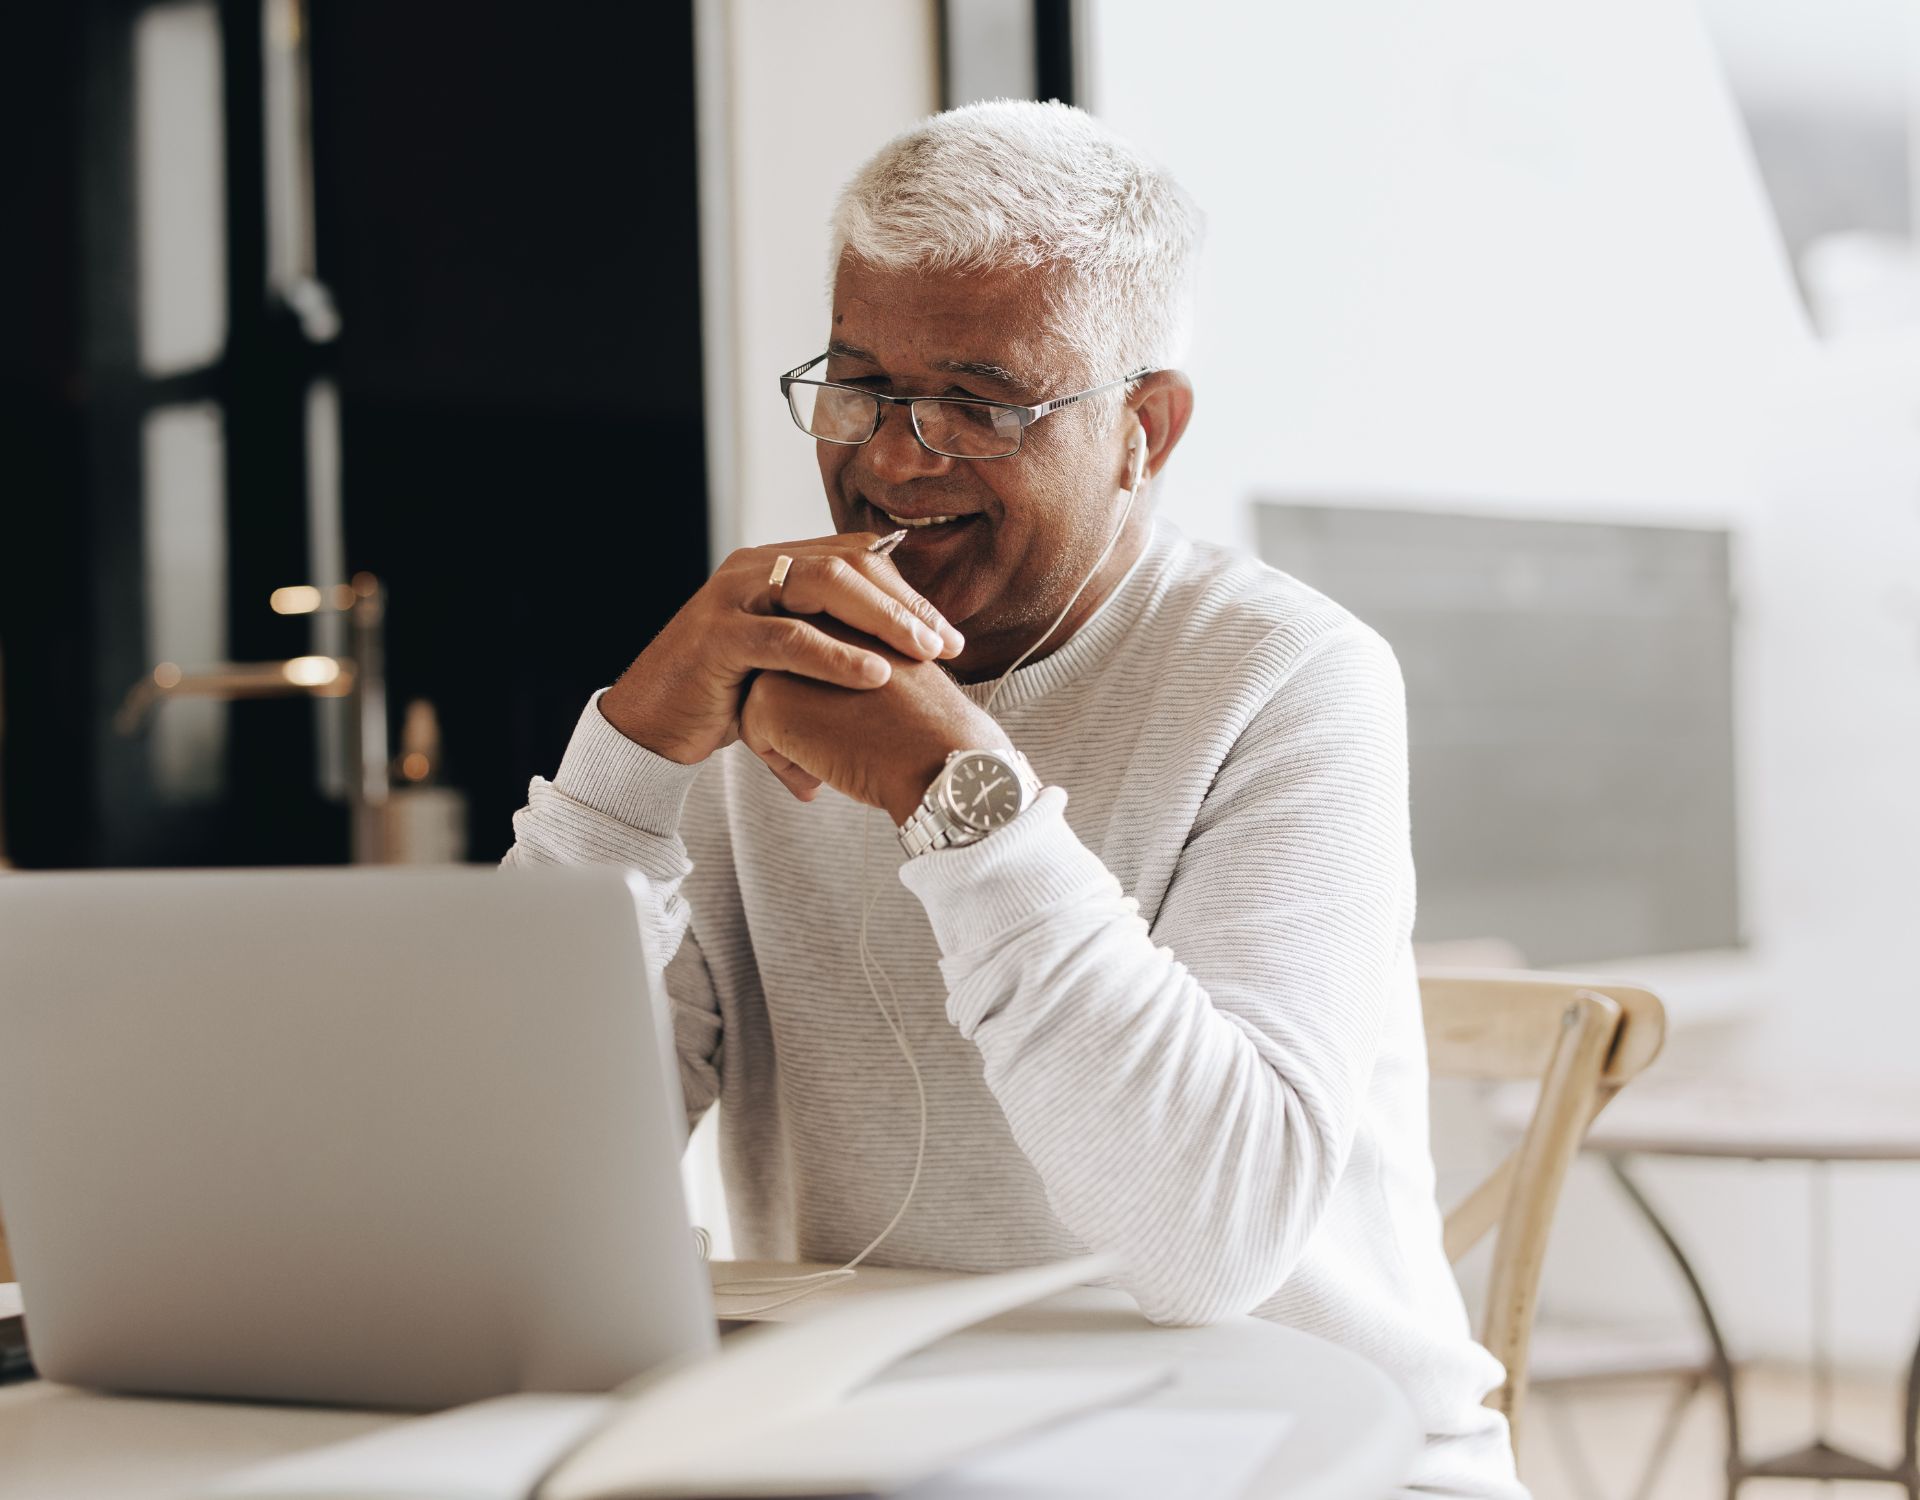 Man with glasses and a white turtleneck is sitting at a deck on his laptop